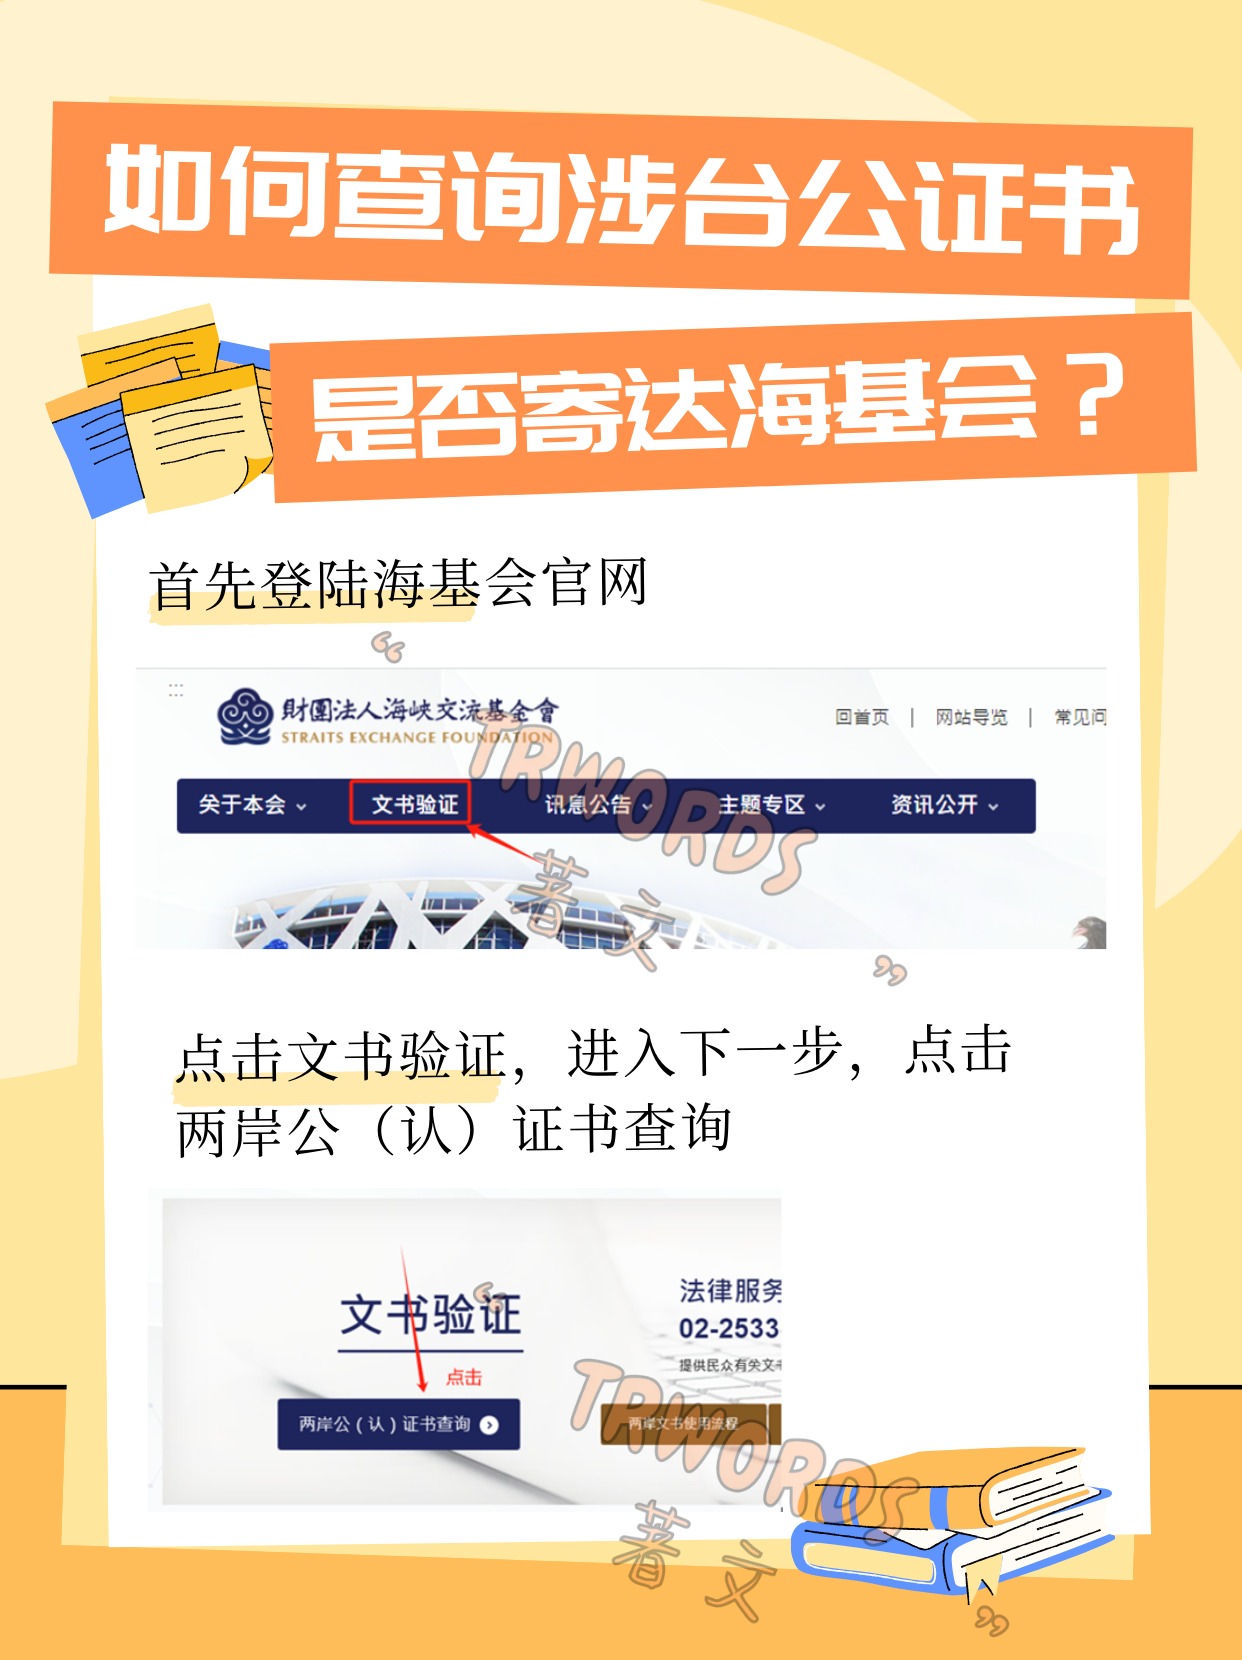 Read more about the article 如何查询涉台公证书是否寄达海基会？